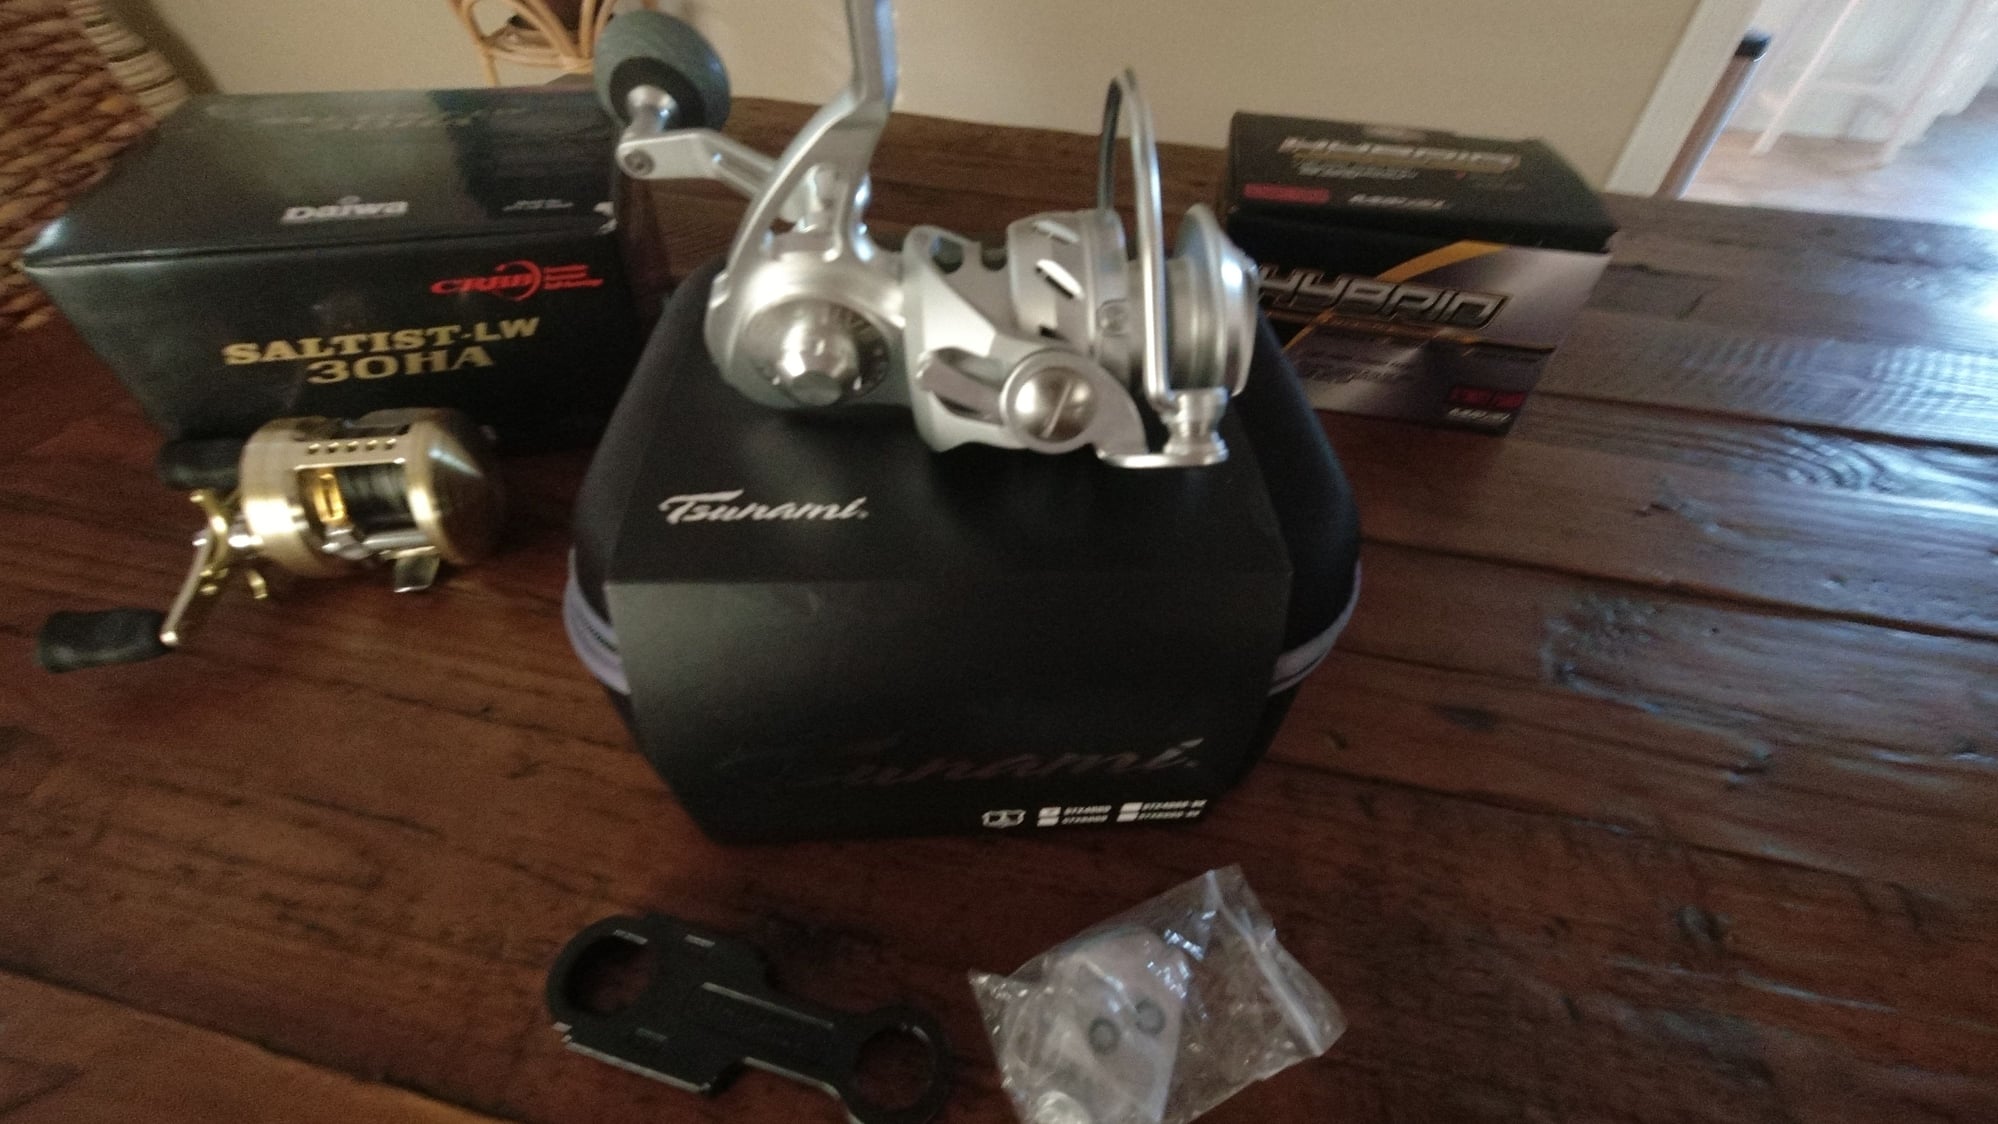 New tsunami saltx 4000 spinning reel - The Hull Truth - Boating and Fishing  Forum